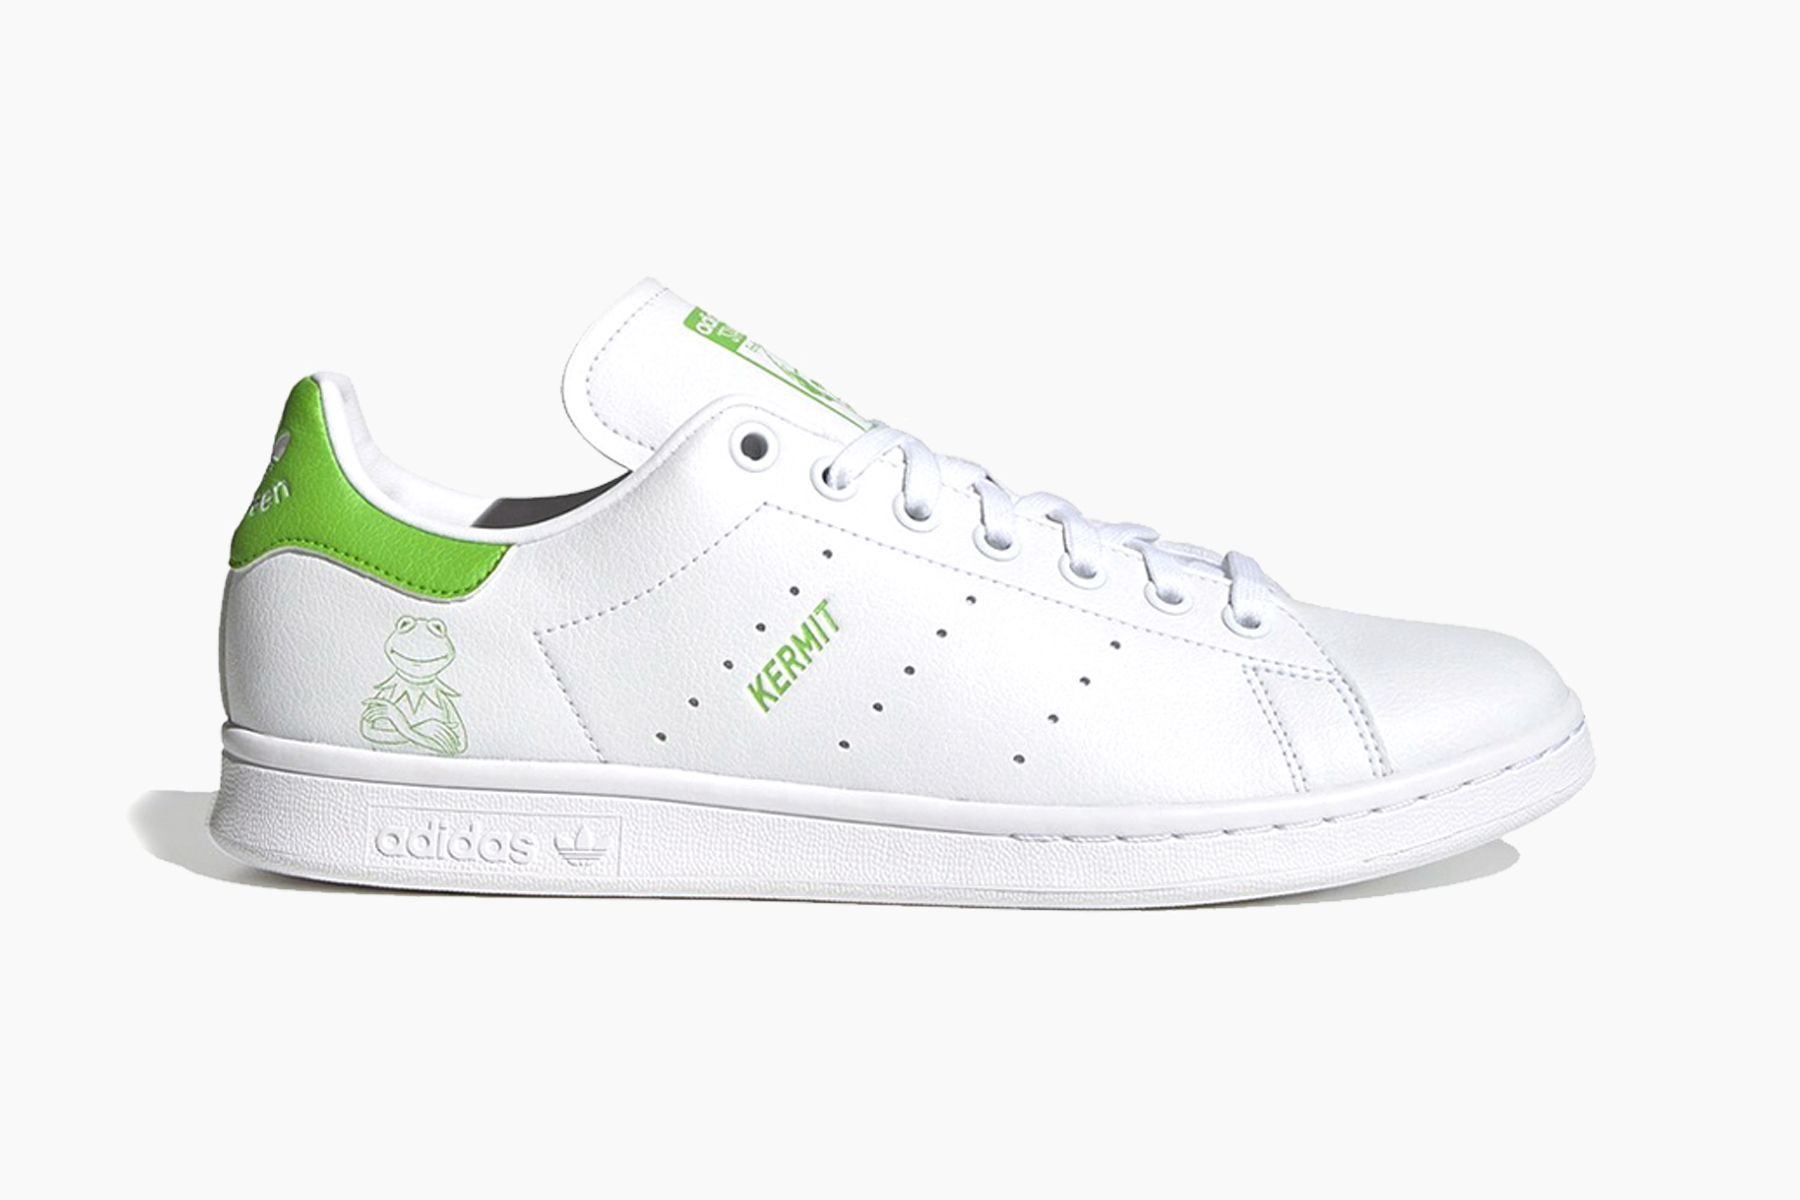 Kermit the Frog x adidas Stan Smith Release | HYPEBEAST